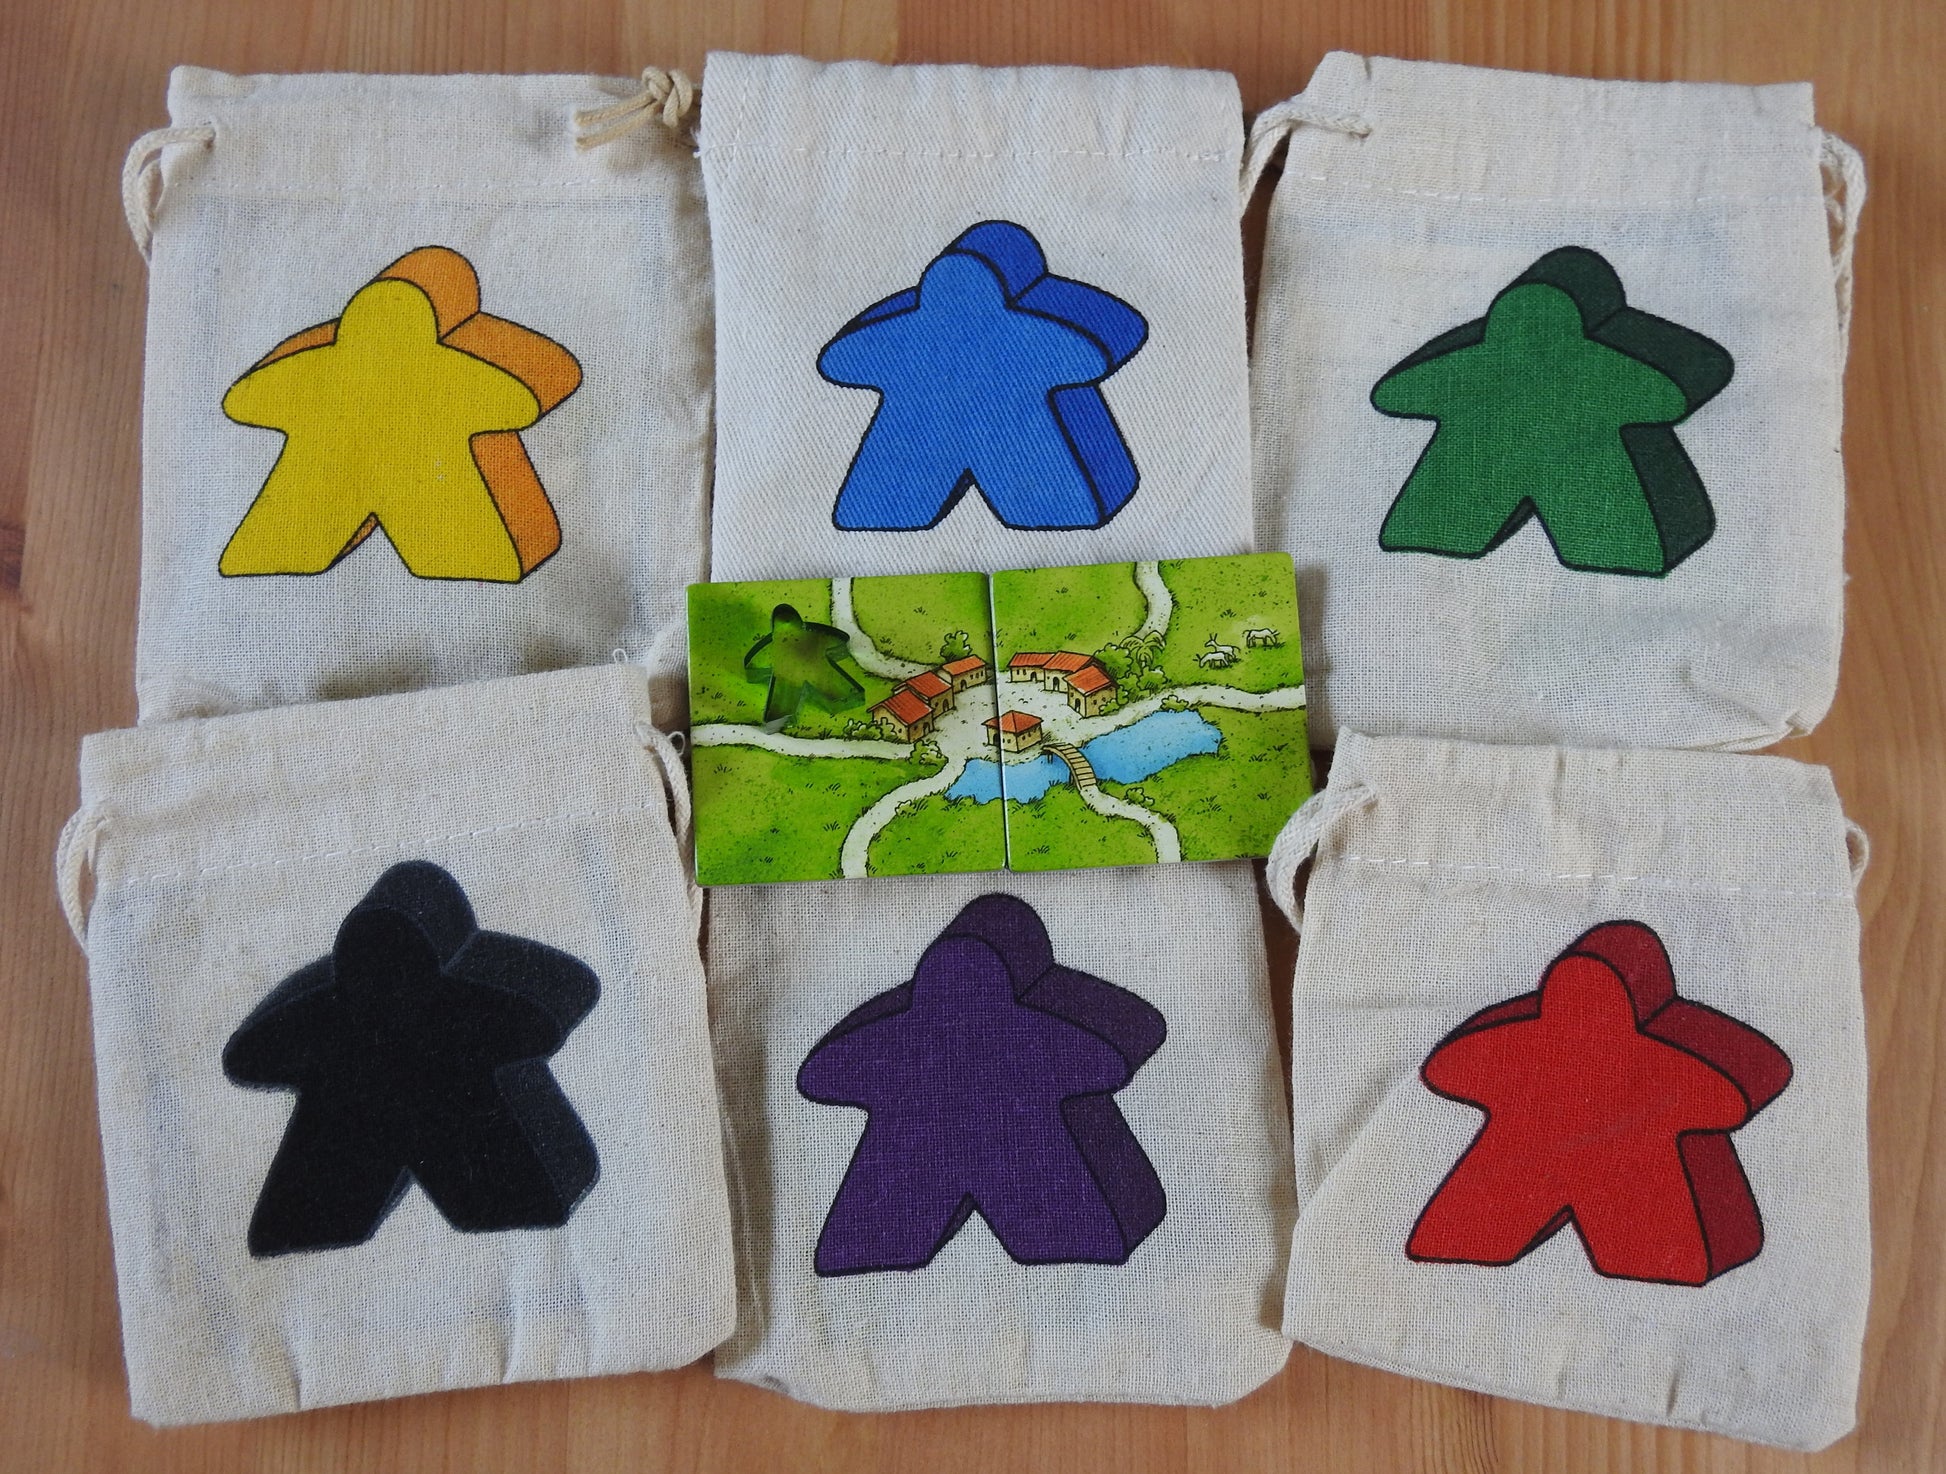 Top view showing all 6 Meeple bag colours and the 2 tiles and teacher meeple that come with this School Carcassonne Mini Expansion.